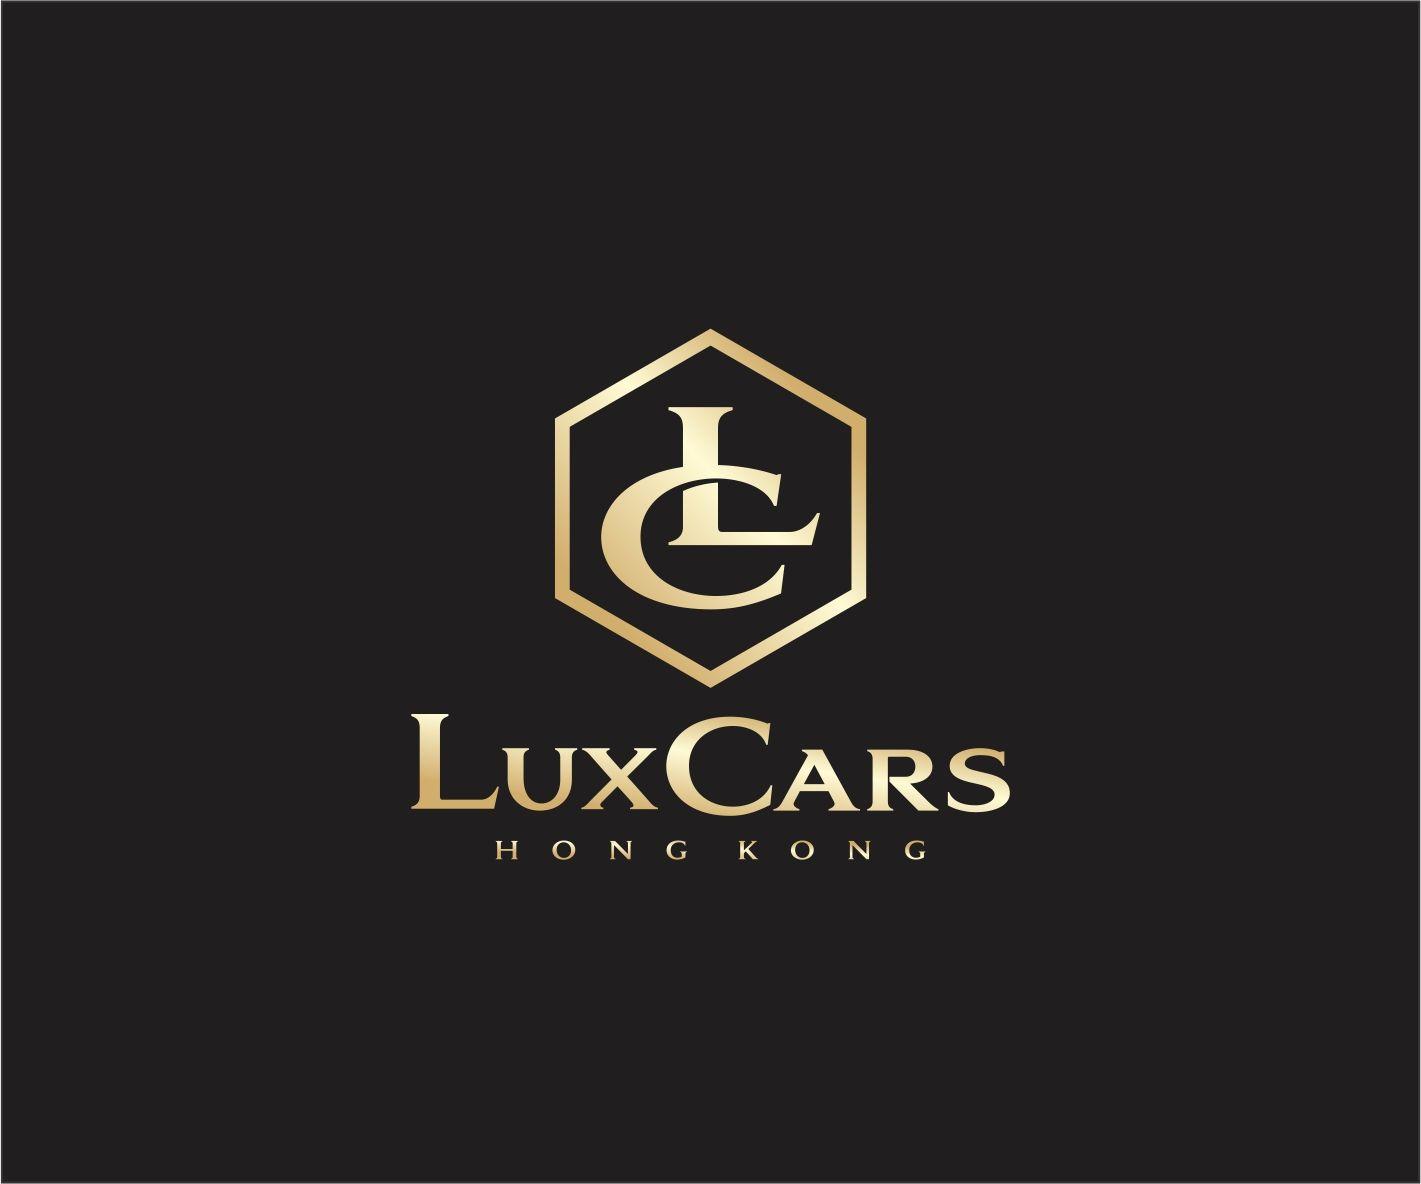 Luxuary Car Logo - Professional, Upmarket, It Company Logo Design for LuxCars by ...